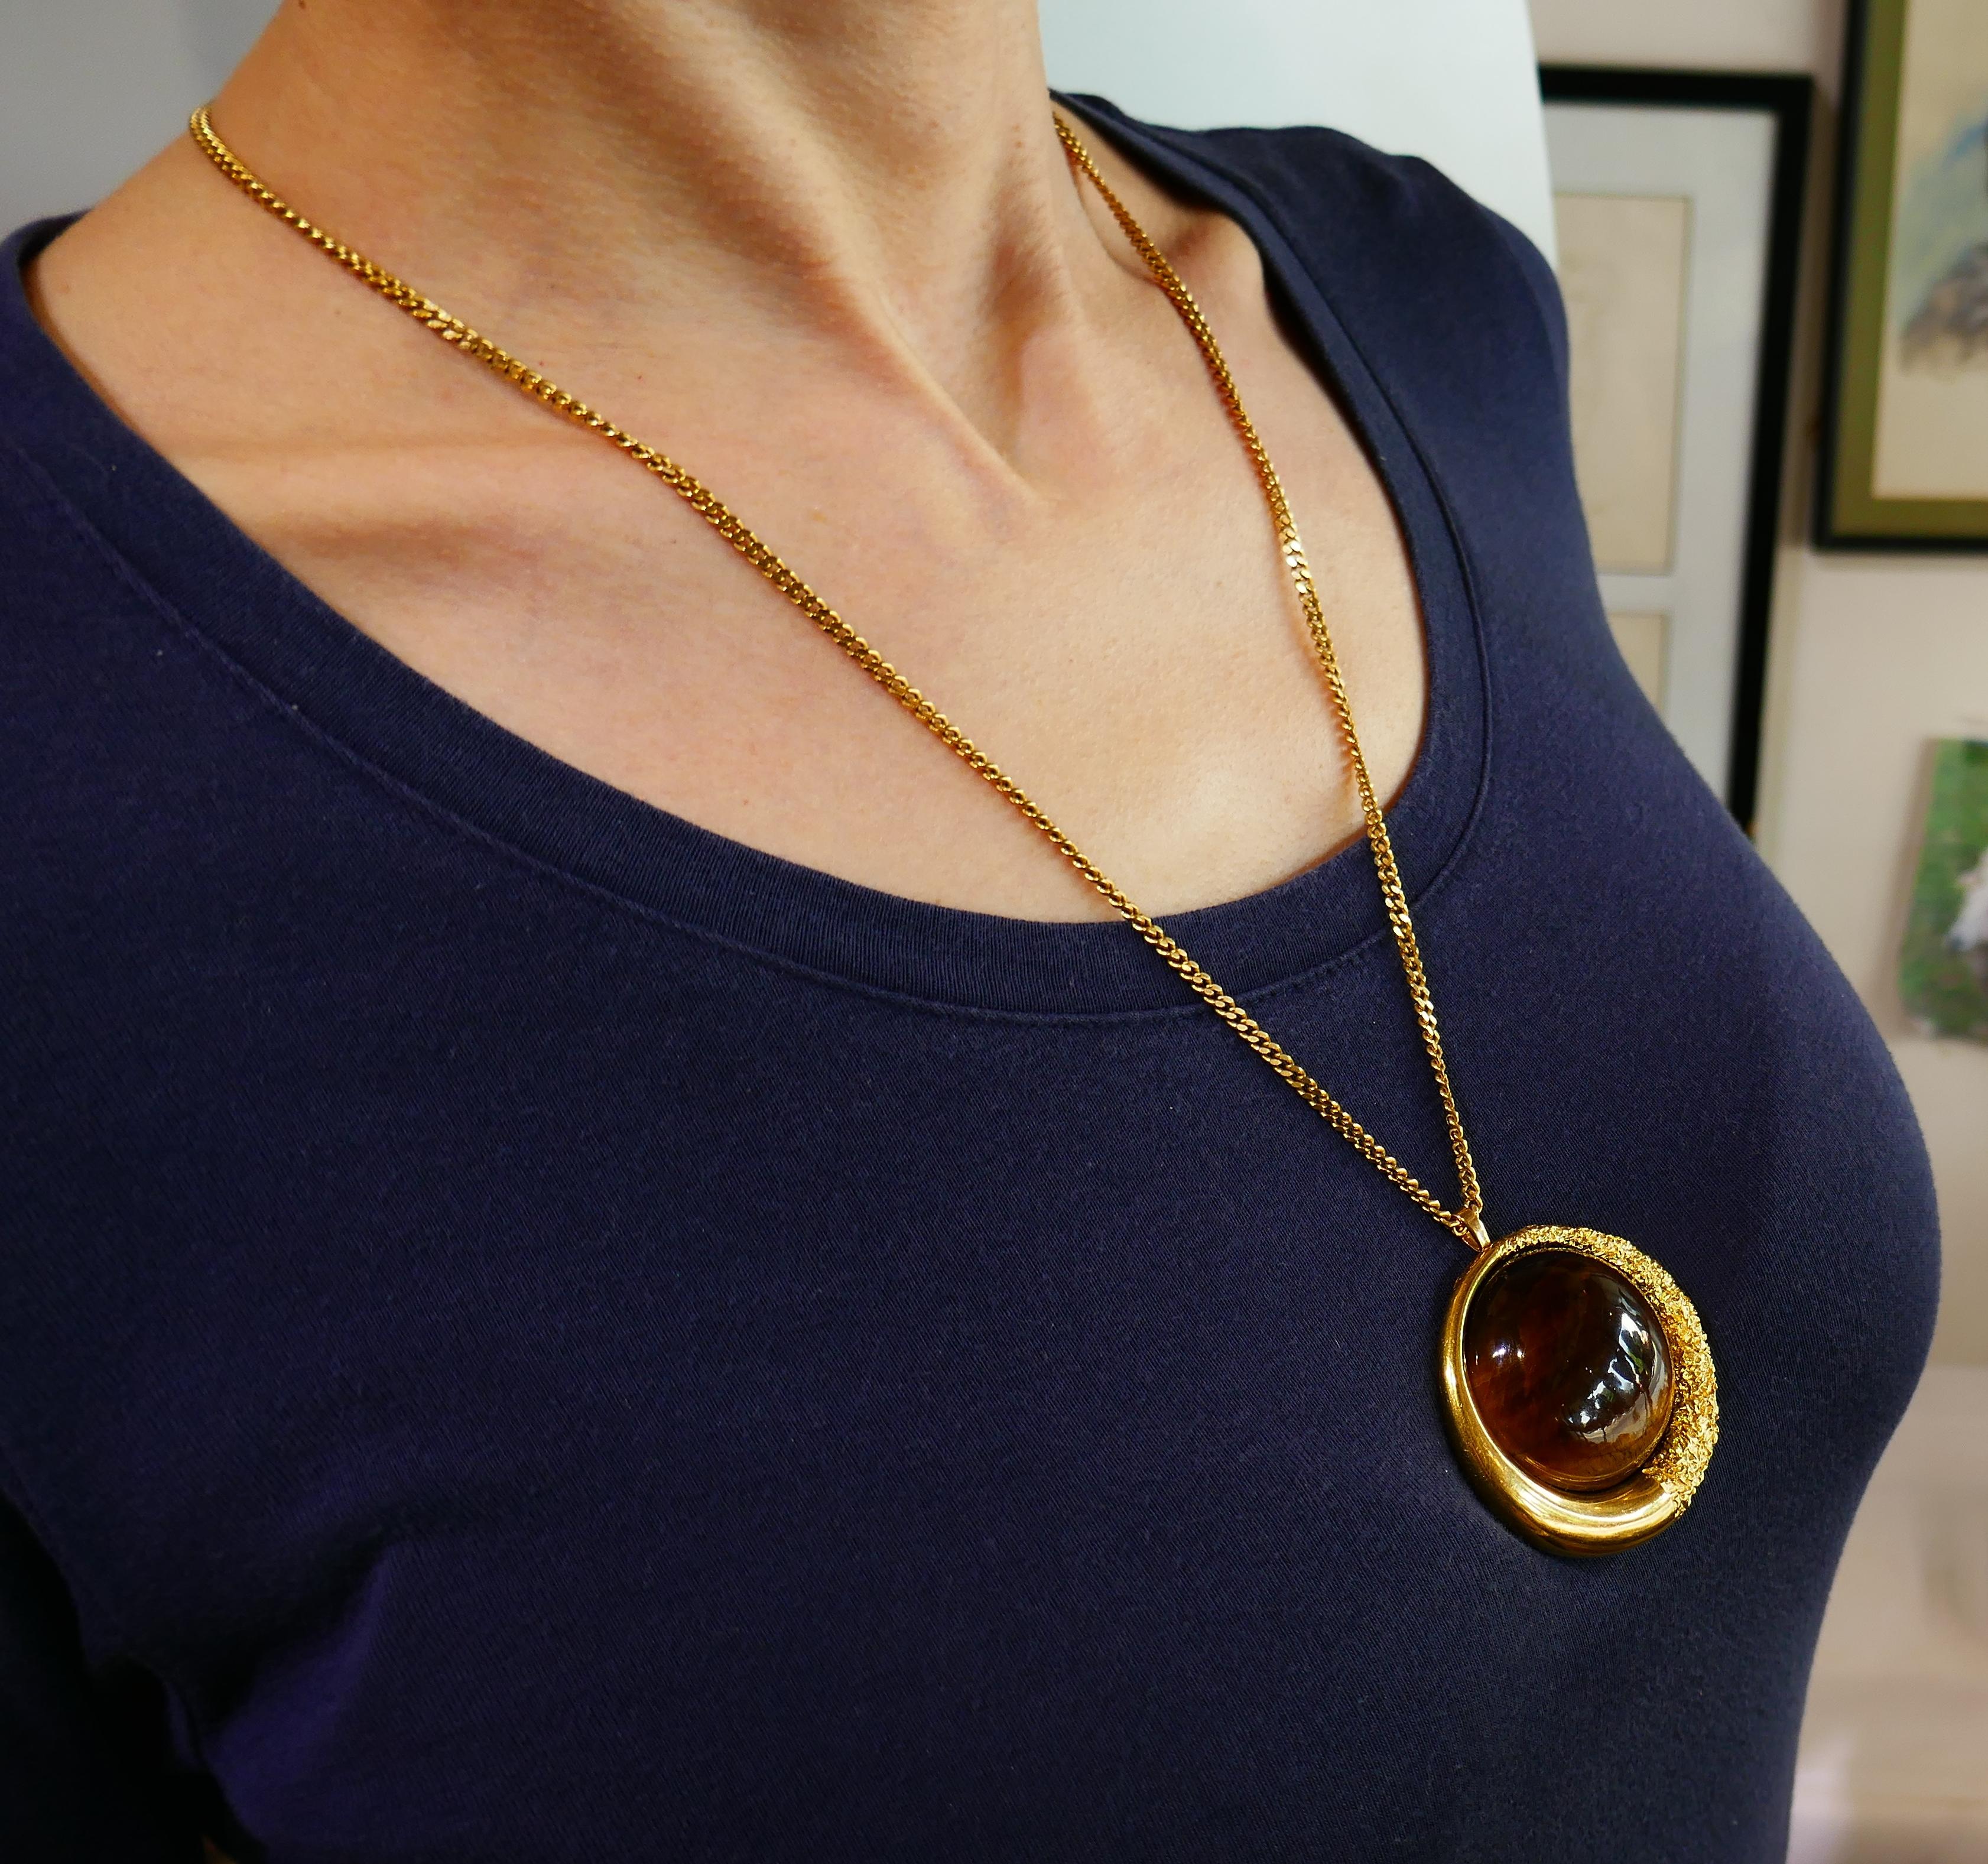 Bold and articulated pin/ pendant created in France in the 1970s. 
The pendant is made of 18 karat (tested) yellow gold and tiger's eye. 
The pendant measures 2 inches (5 centimeters) in diameter and weighs 46.8 grams. 
The tiger's eye part measures